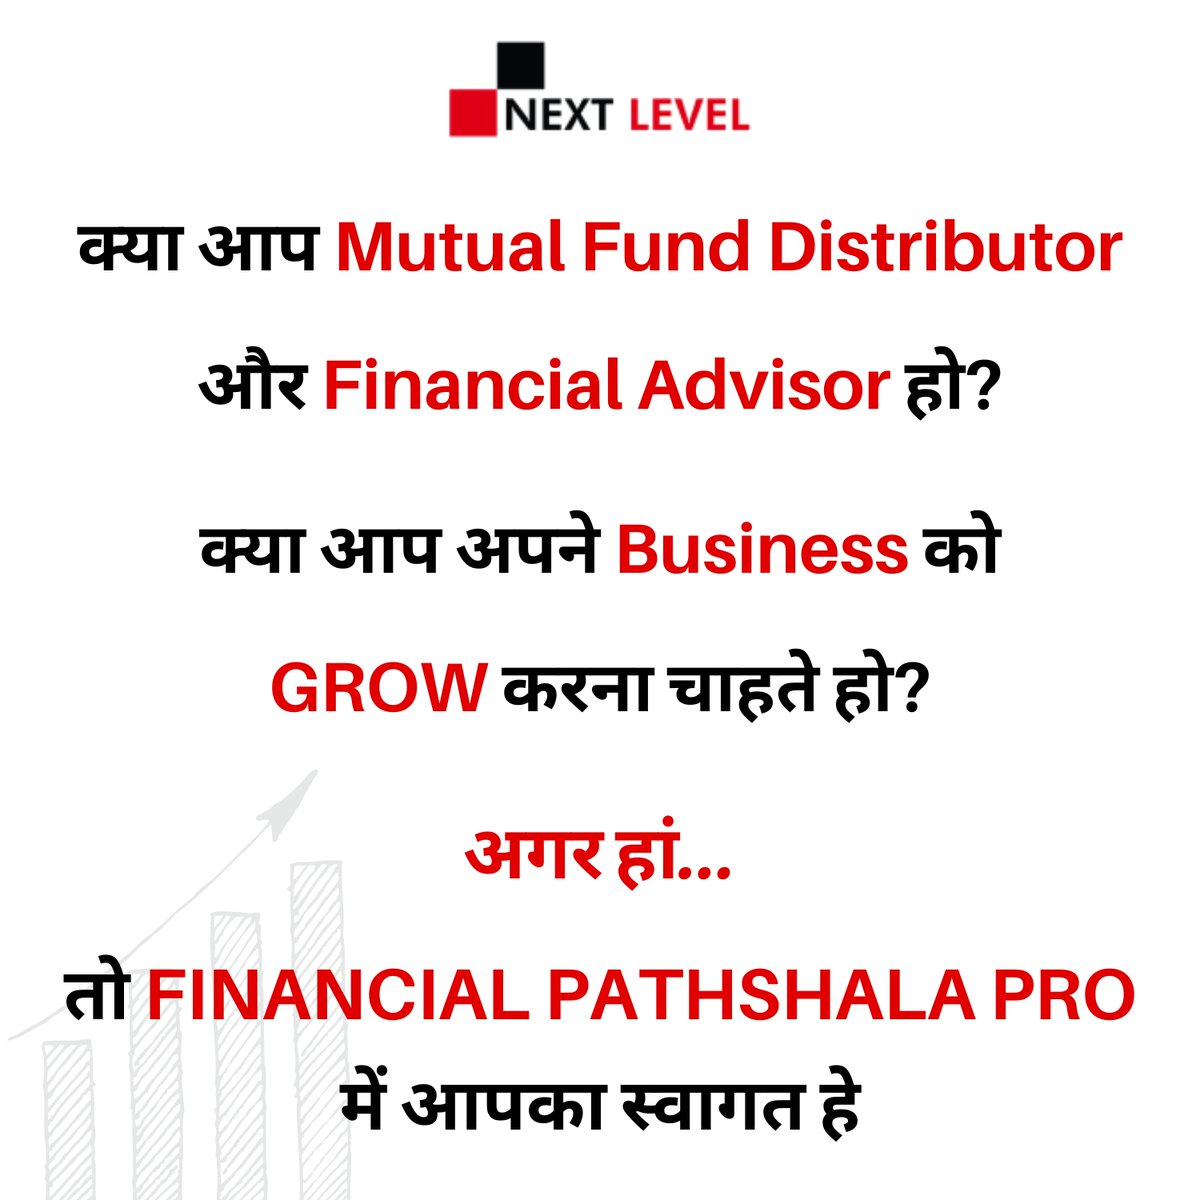 Join Our Financial Pathshal Pro Now!

#TeamNLE #NextLevelEducation #nlepathshala #nextlevellessons #teamnextleveleducation #FinancialFuture #nextlevel #nexrlevelfppro #powerofcompounding #financialpathshalapro #transform #teamNLE #teamnle #NLEPathshala #nle